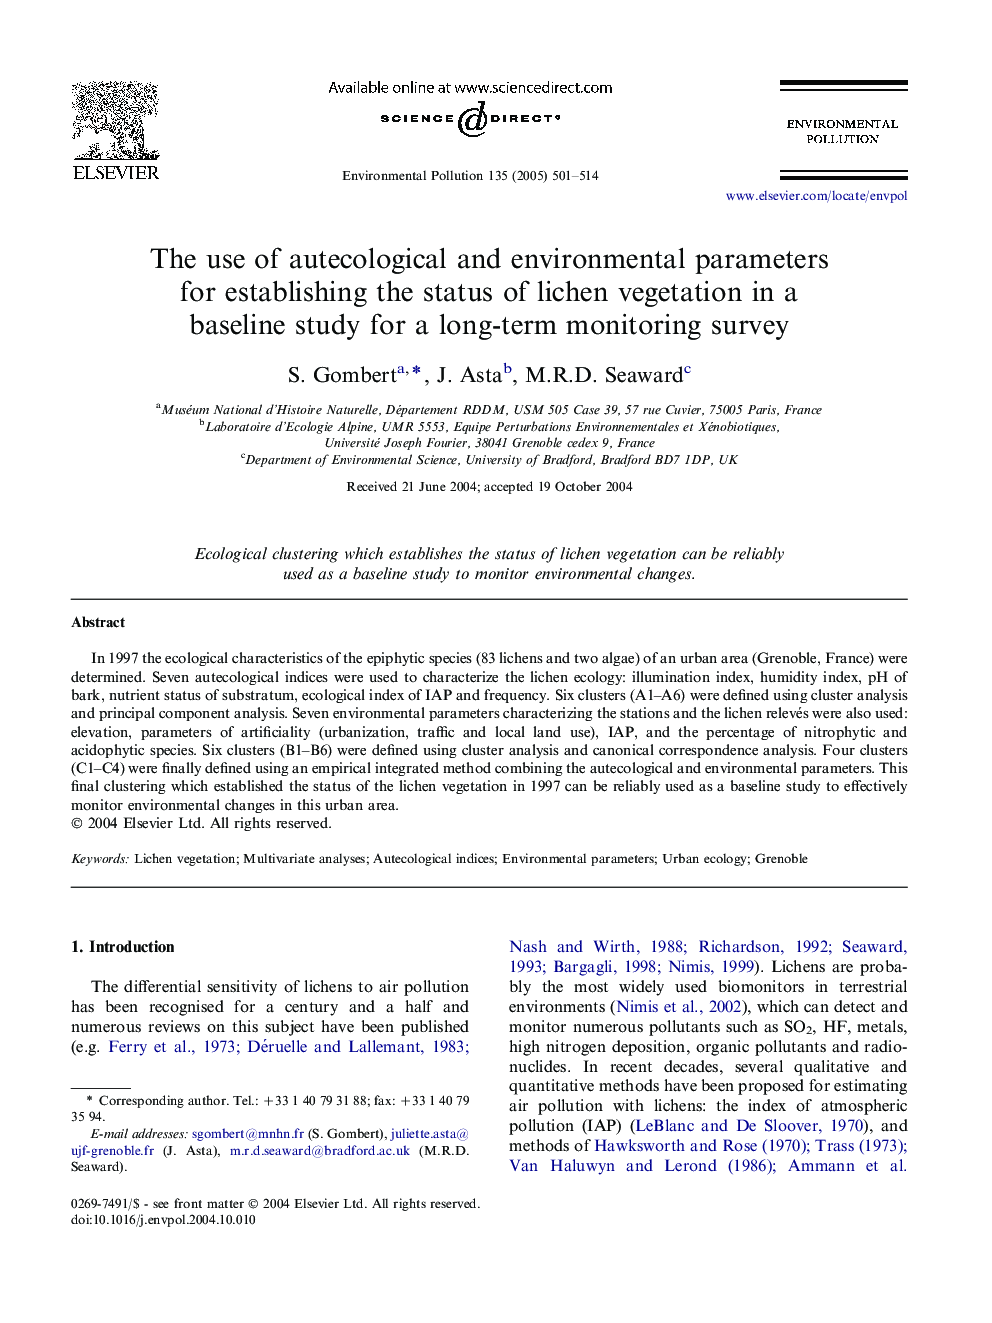 The use of autecological and environmental parameters for establishing the status of lichen vegetation in a baseline study for a long-term monitoring survey